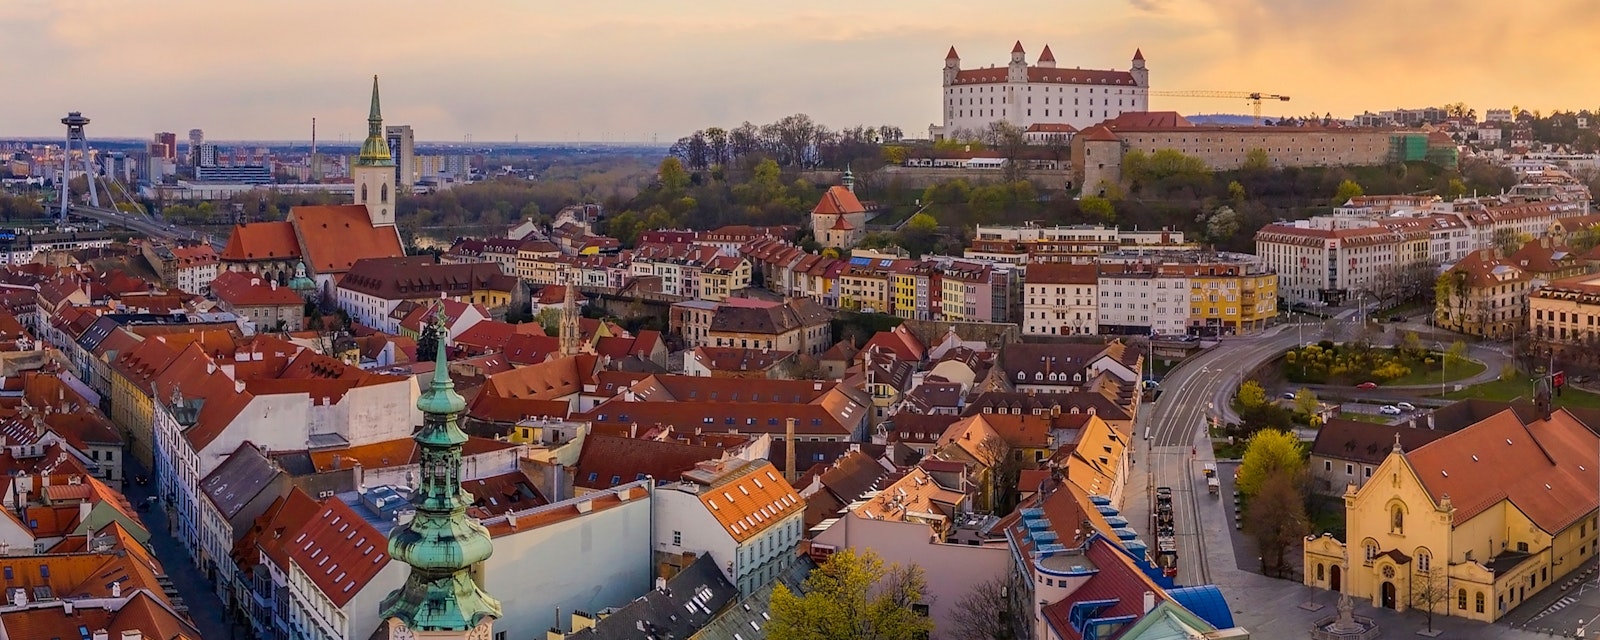 Beautiful,Aerial,Drone,Photo,Of,Bratislava,Old,Town,Historical,City